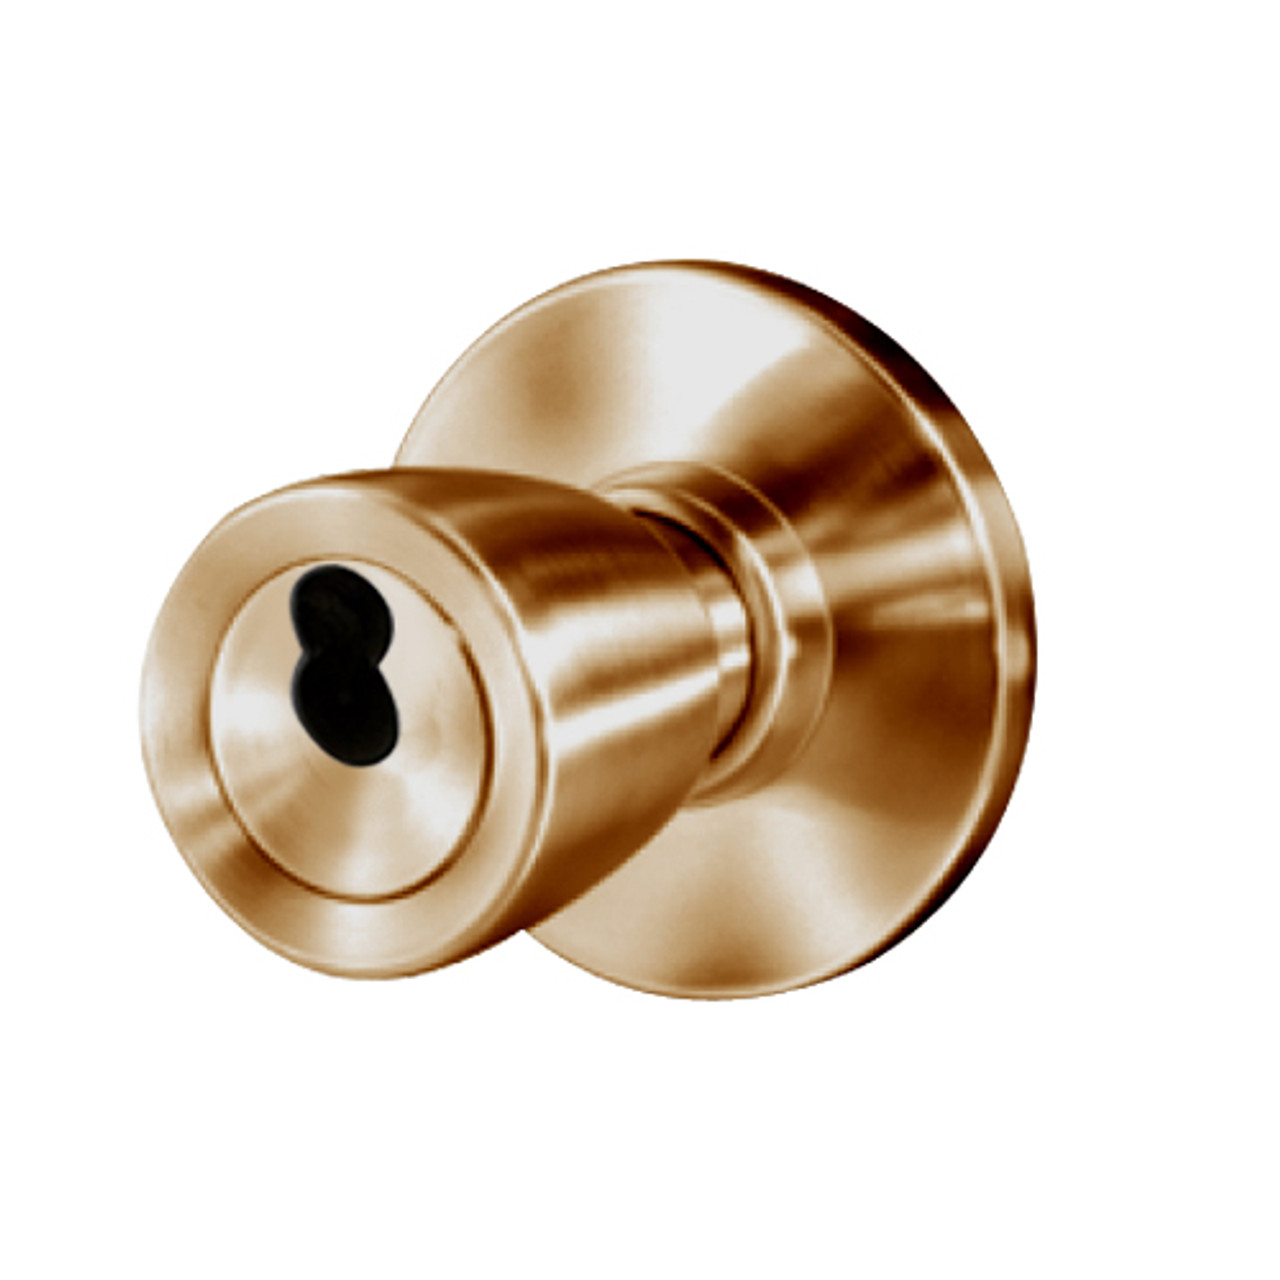 8K47YD6AS3612 Best 8K Series Exit Heavy Duty Cylindrical Knob Locks with Tulip Style in Satin Bronze